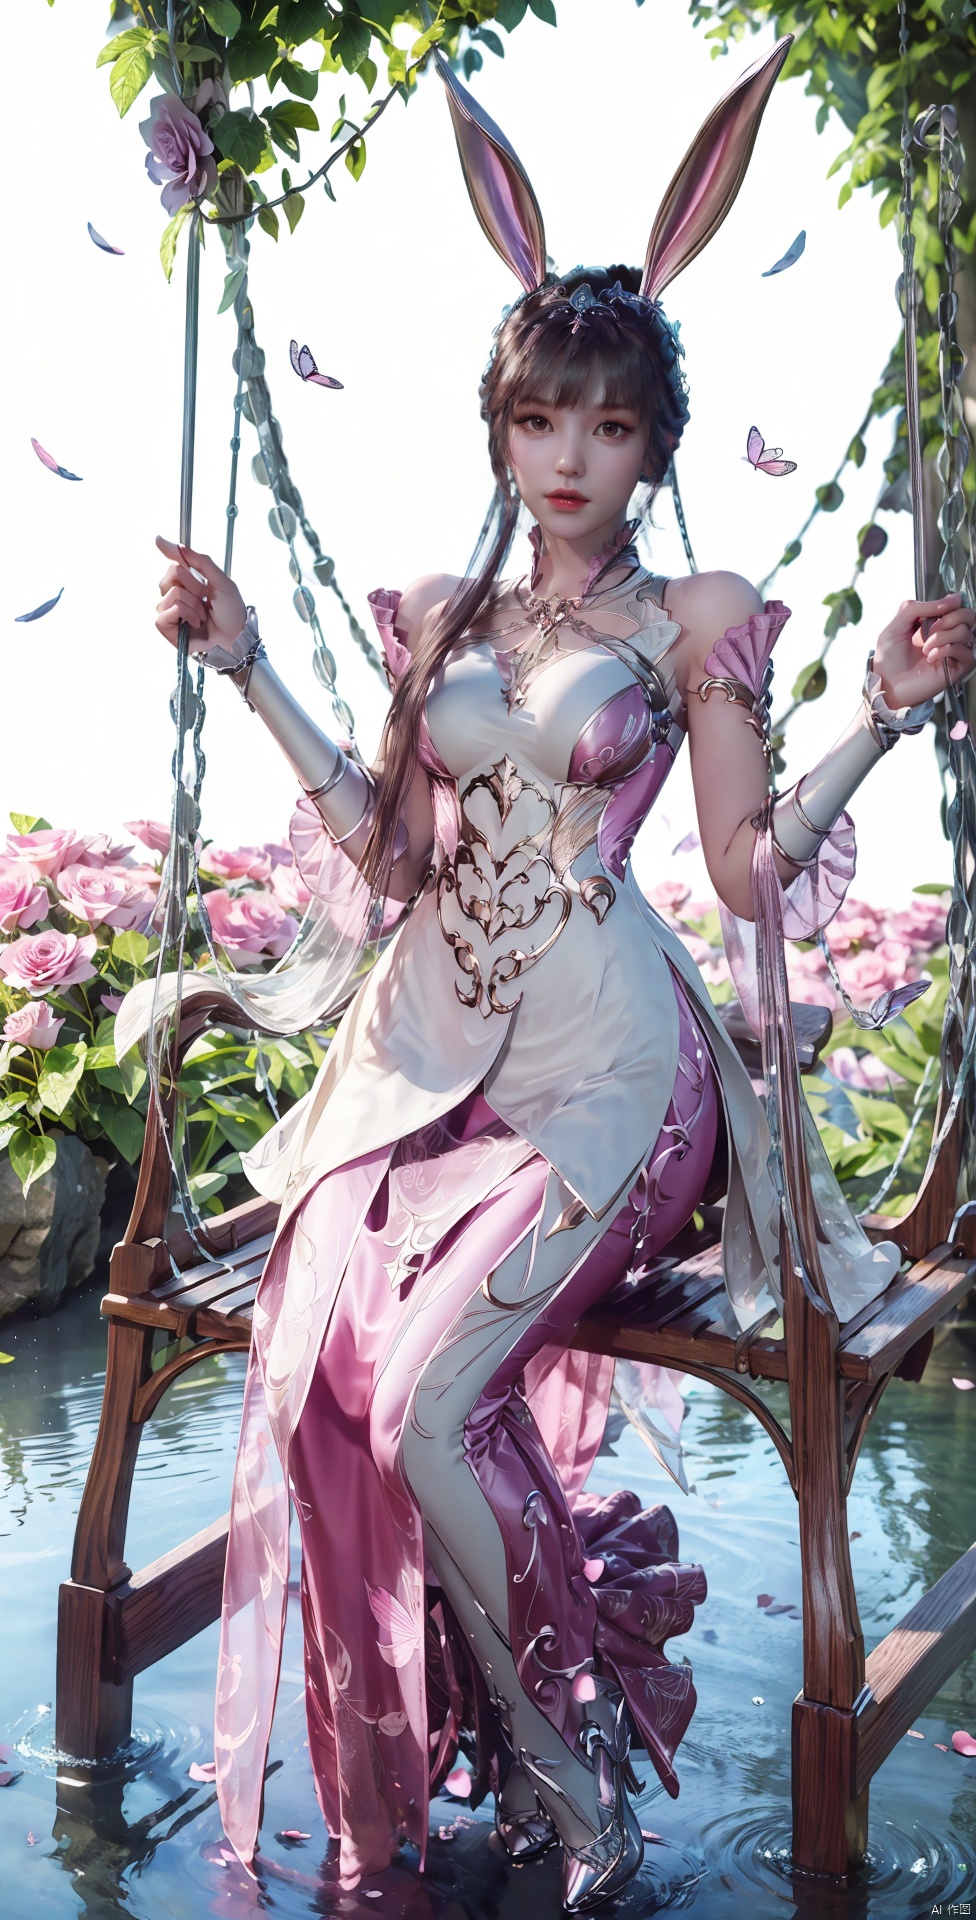 rabbit ears,long hair,Conservative conservative long skirt,long dress,Elaborate floral headgear,sitting,long skirt,princess dress,swing,The highest picture quality, conservative dress, exquisite CG, sitting on a swing wrapped in flowers and vines, water droplets in your hair, beautiful goddess, sparkling starlight, close-ups, exquisite face, exquisite lips, exquisite eyes, exquisite nose, dream, surrounded by pink butterflies, surrounded by sparkling water droplets, crystal pink crystal, shimmering lake background, rose petals falling, clothes studded with sparkling diamond pearls, high heels, long legs